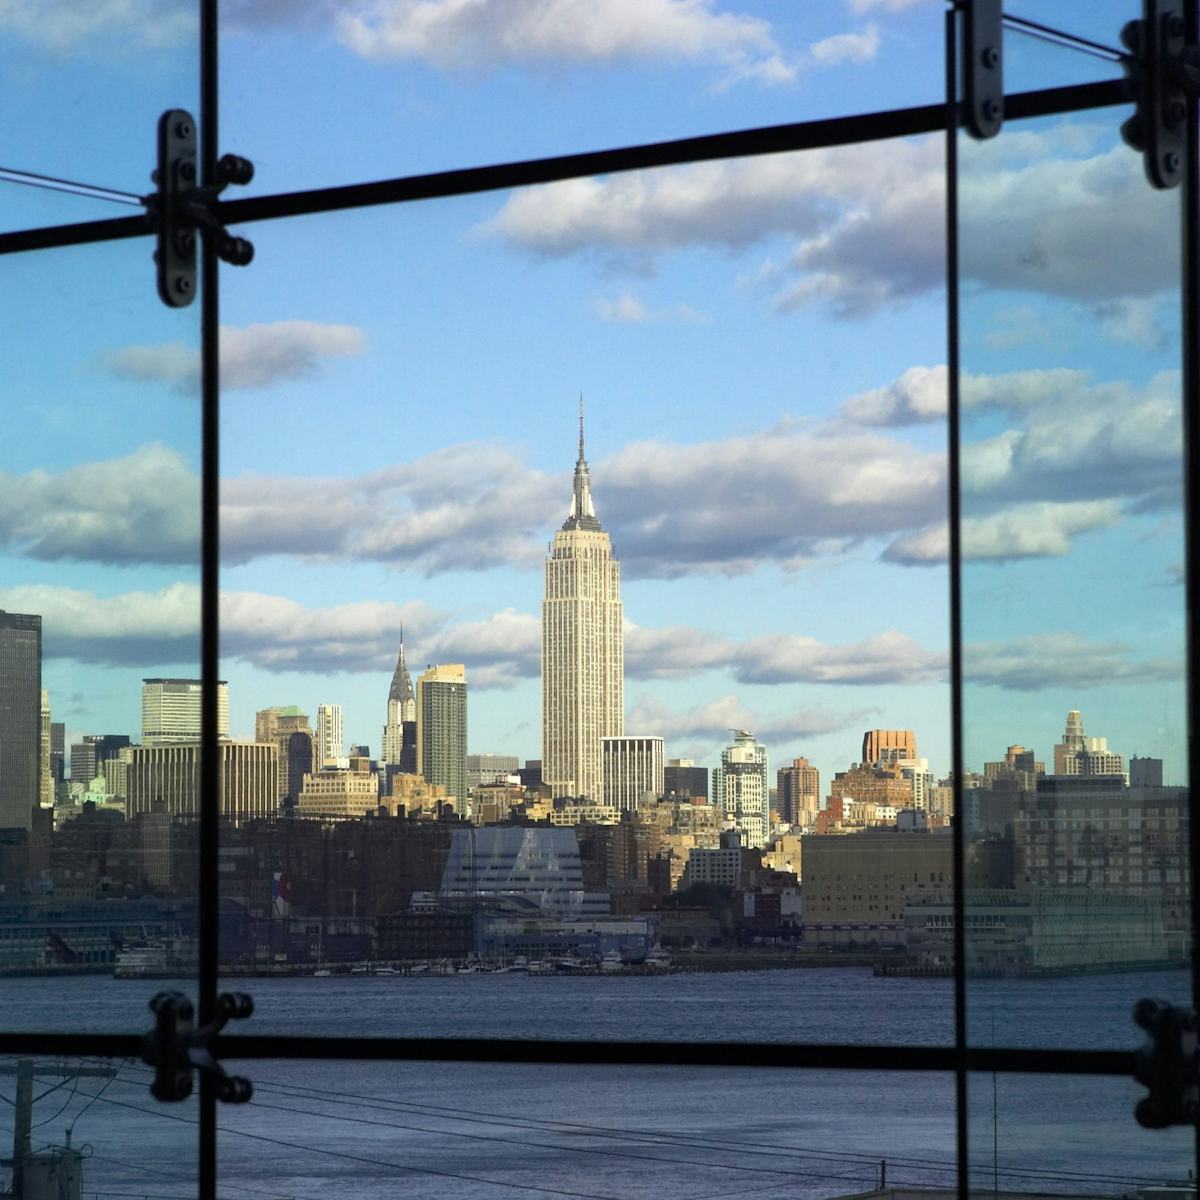 View of New York City from the Stevens campus